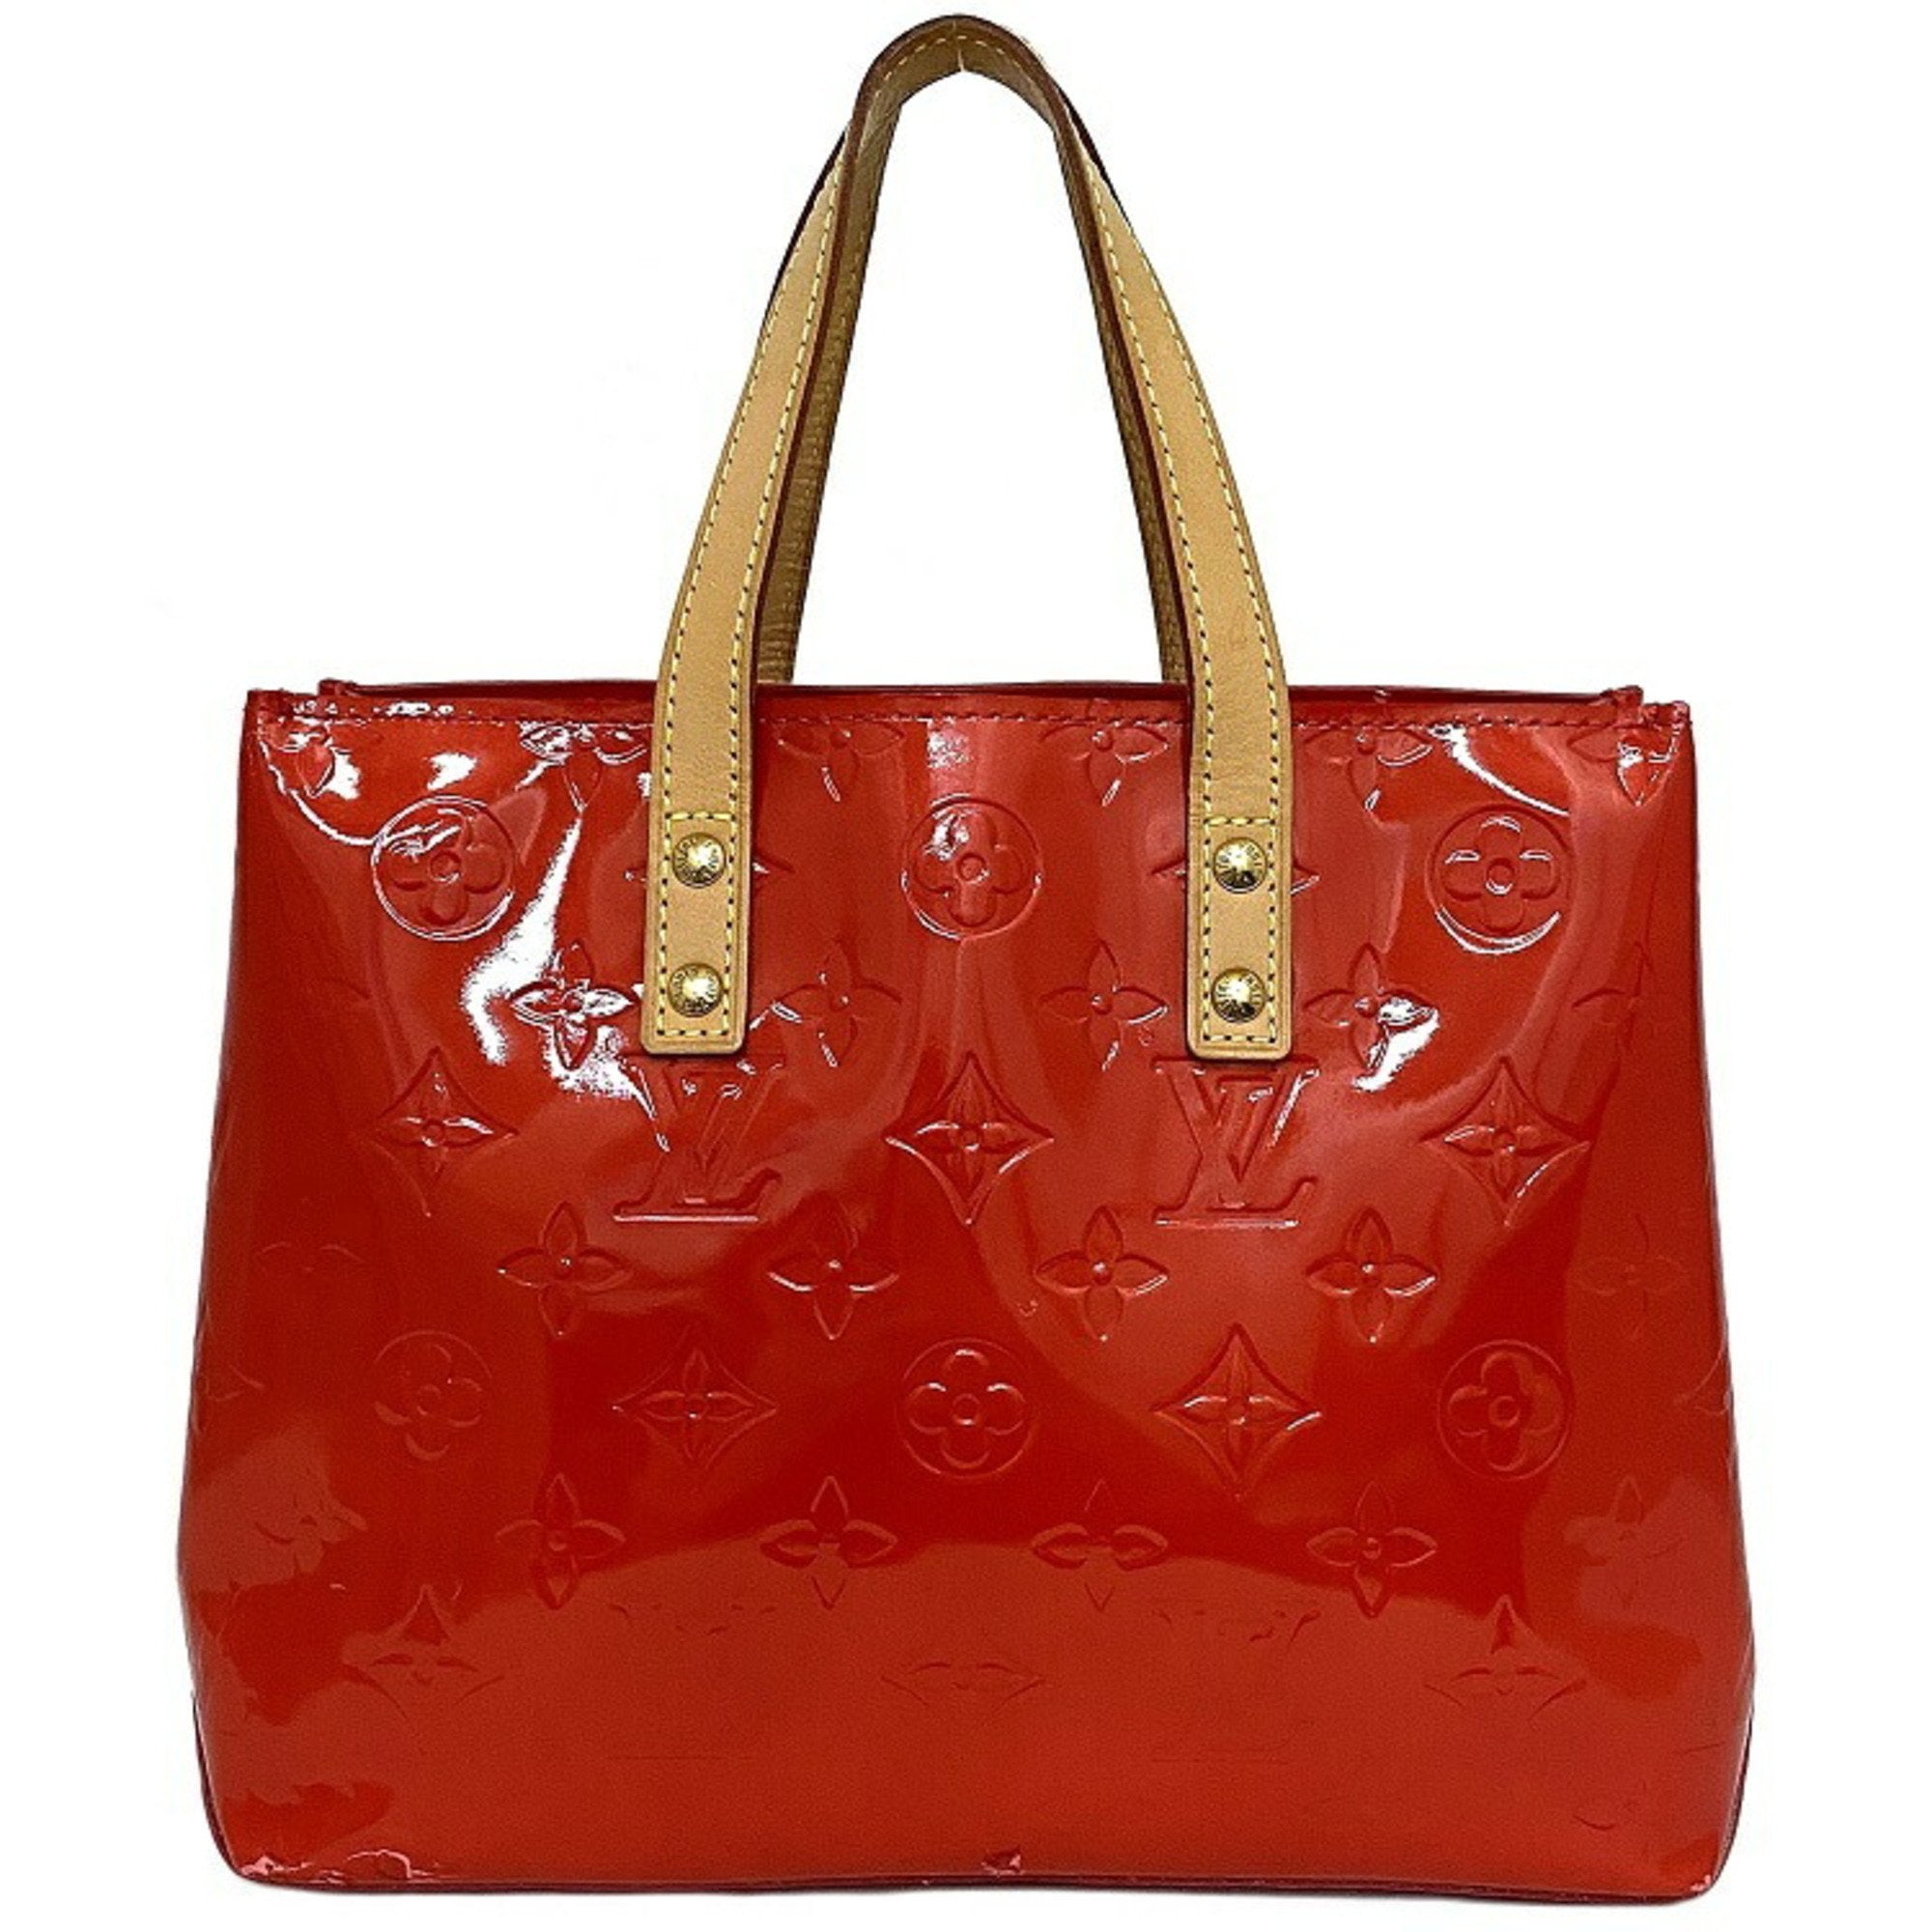 Louis Vuitton Red Vernis Bag - 9 For Sale on 1stDibs